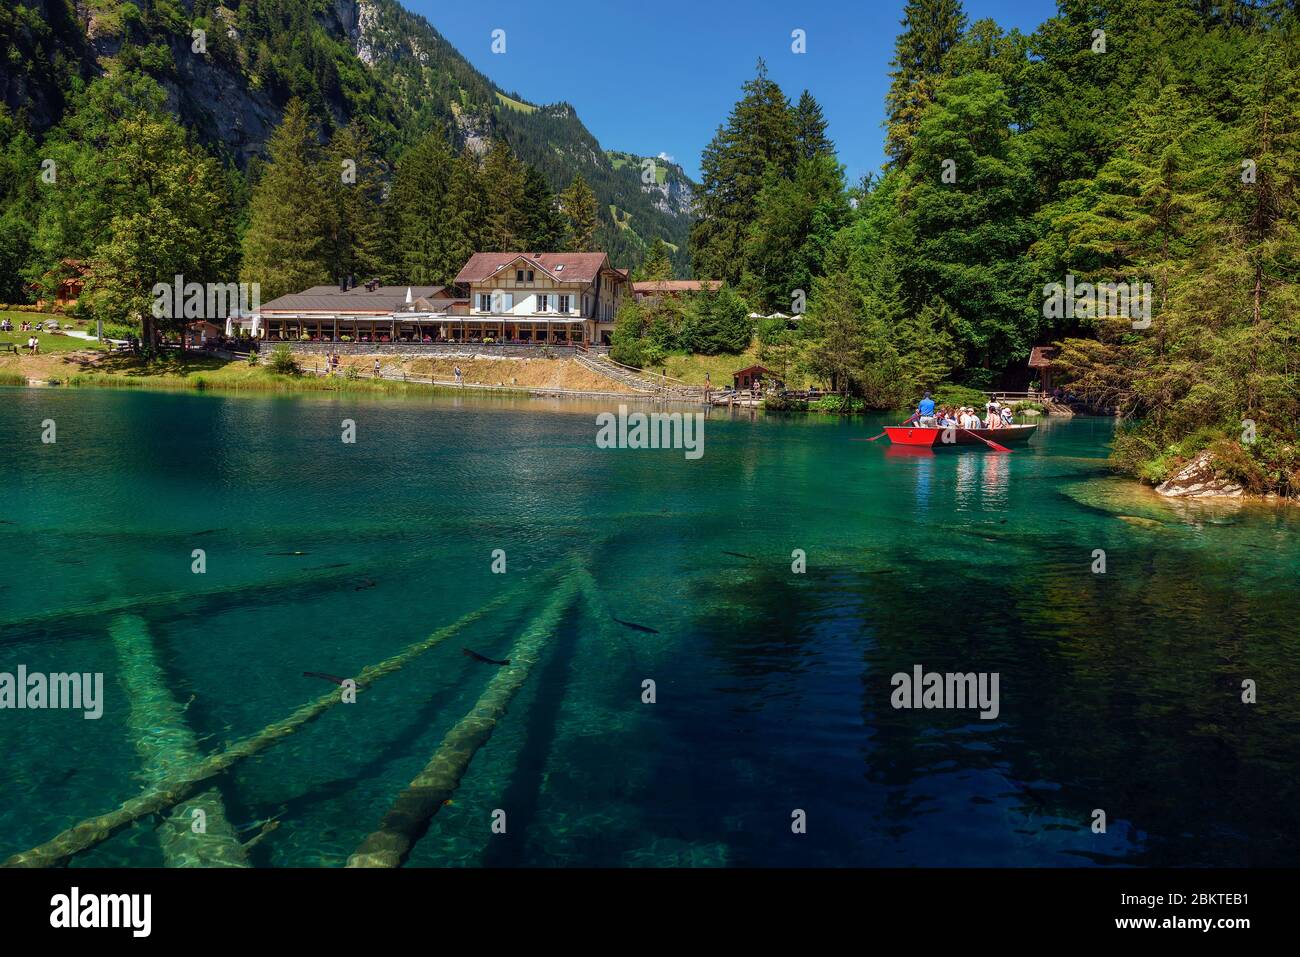 Tourists taking a boat trip on Blausee Lake in Switzerland Stock Photo